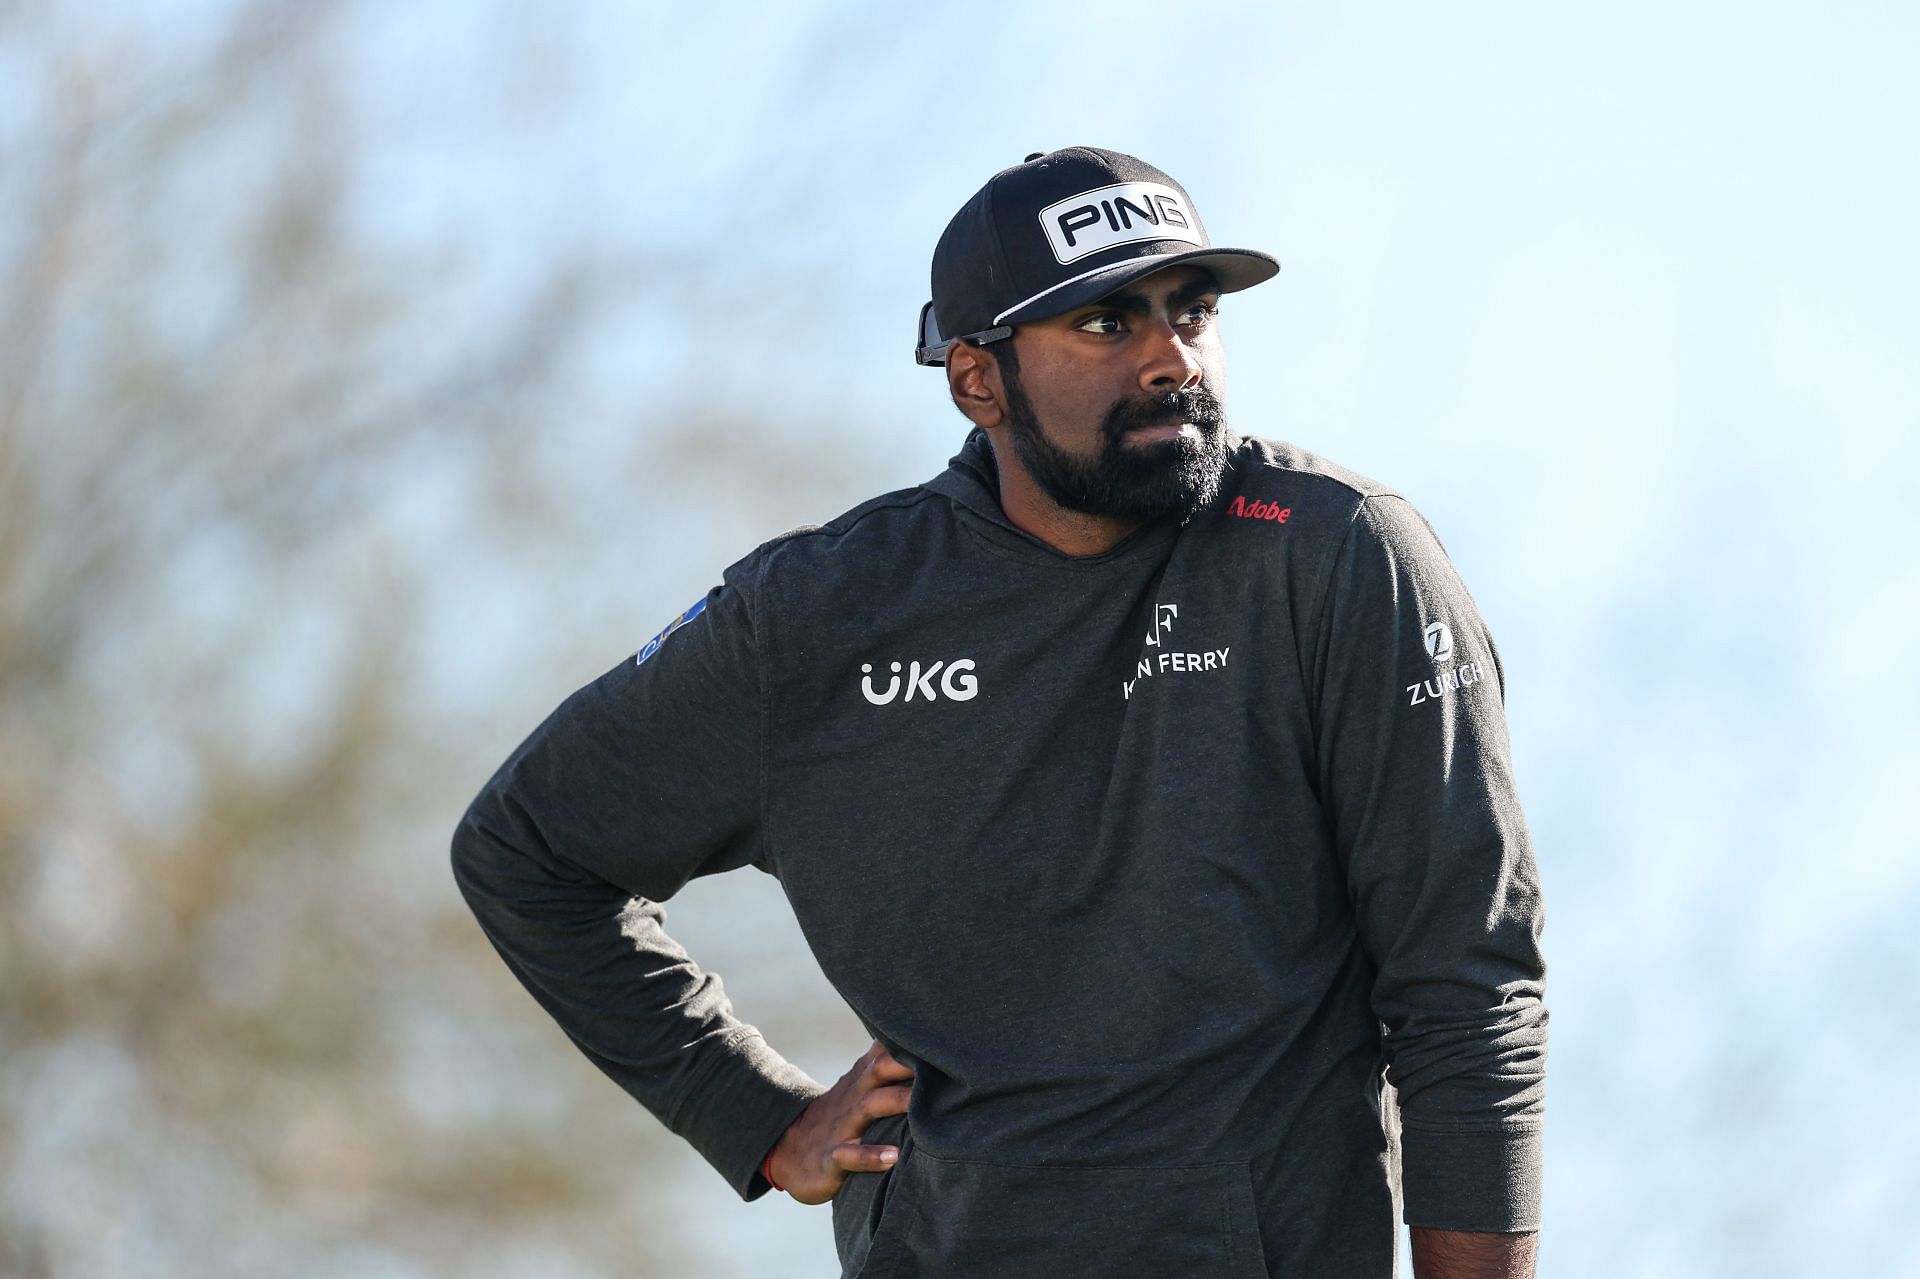 Sahith Theegala earned a lot at the WM Phoenix Open